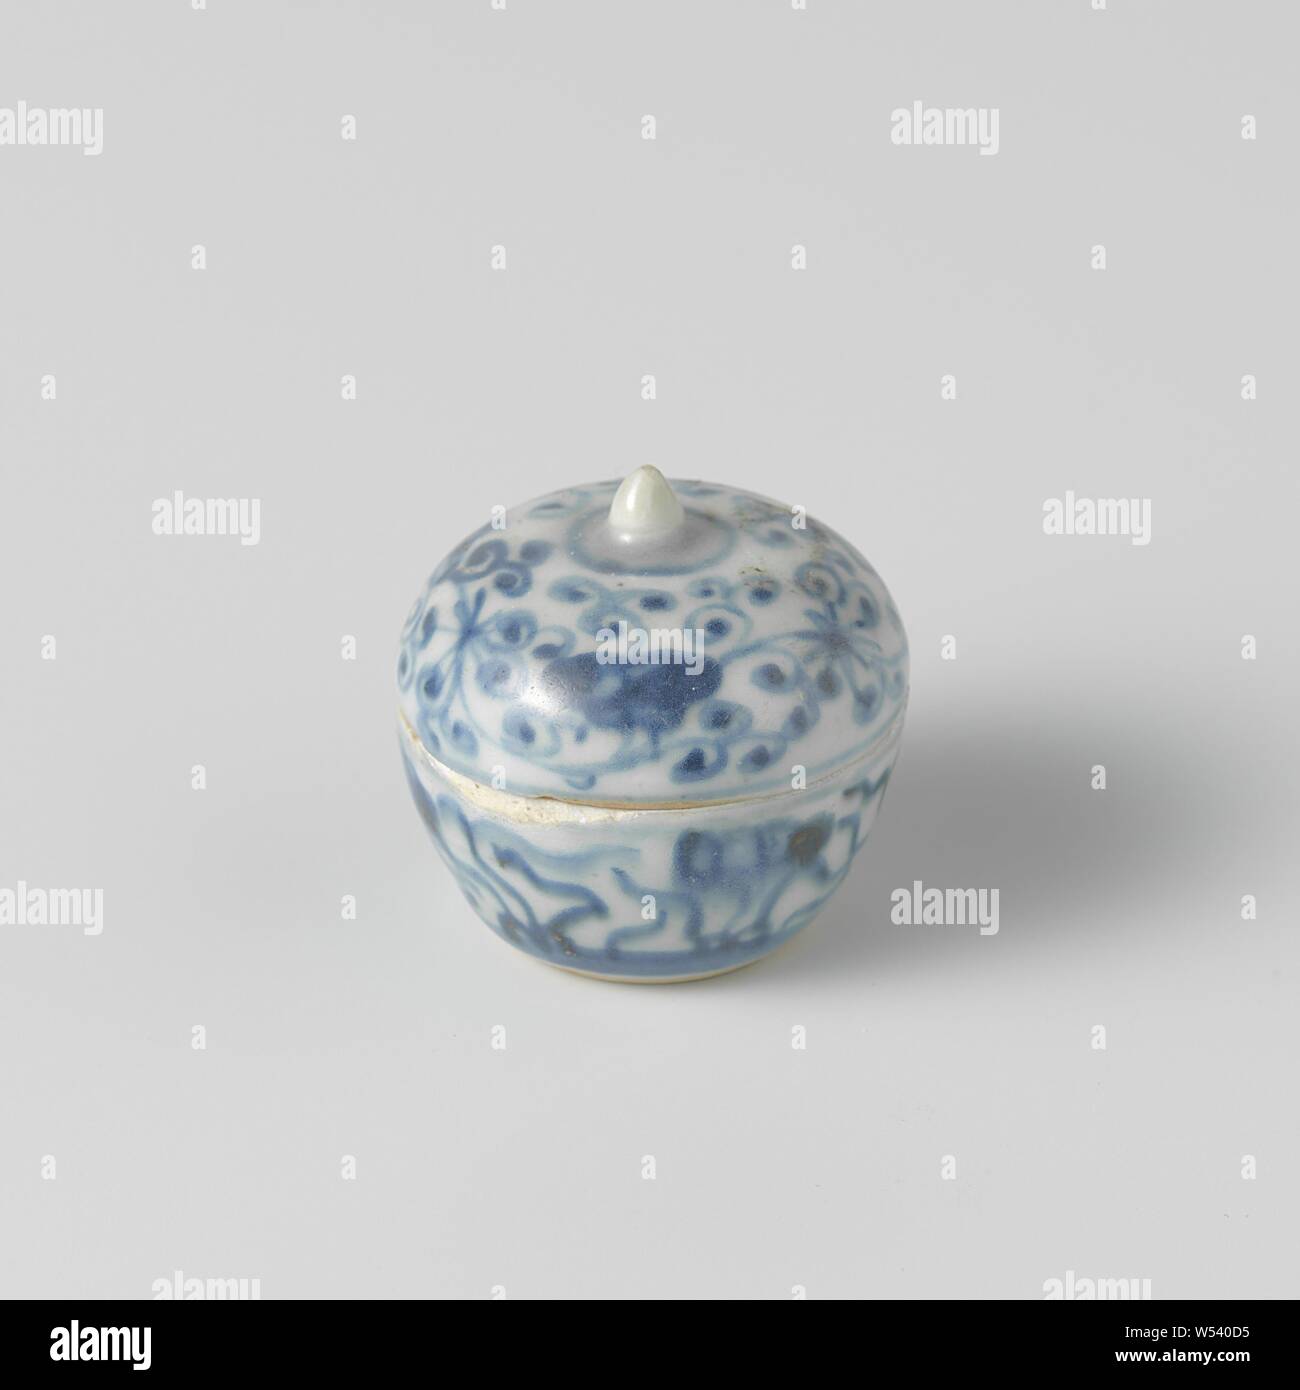 Round box with floral scrolls, Round box made of porcelain with a cone-shaped lid knob, painted in underglaze blue. The box is covered with flower vines and mushrooms (lingzhi). Transition porcelain in blue and white, ornament derived from plant forms, anonymous, China, c. 1650, Qing-dynasty (1644-1912) / Shunzhi-period (1644-1661), porcelain (material), glaze, cobalt (mineral), vitrification, h 4.2 cm d 4.3 cm Stock Photo